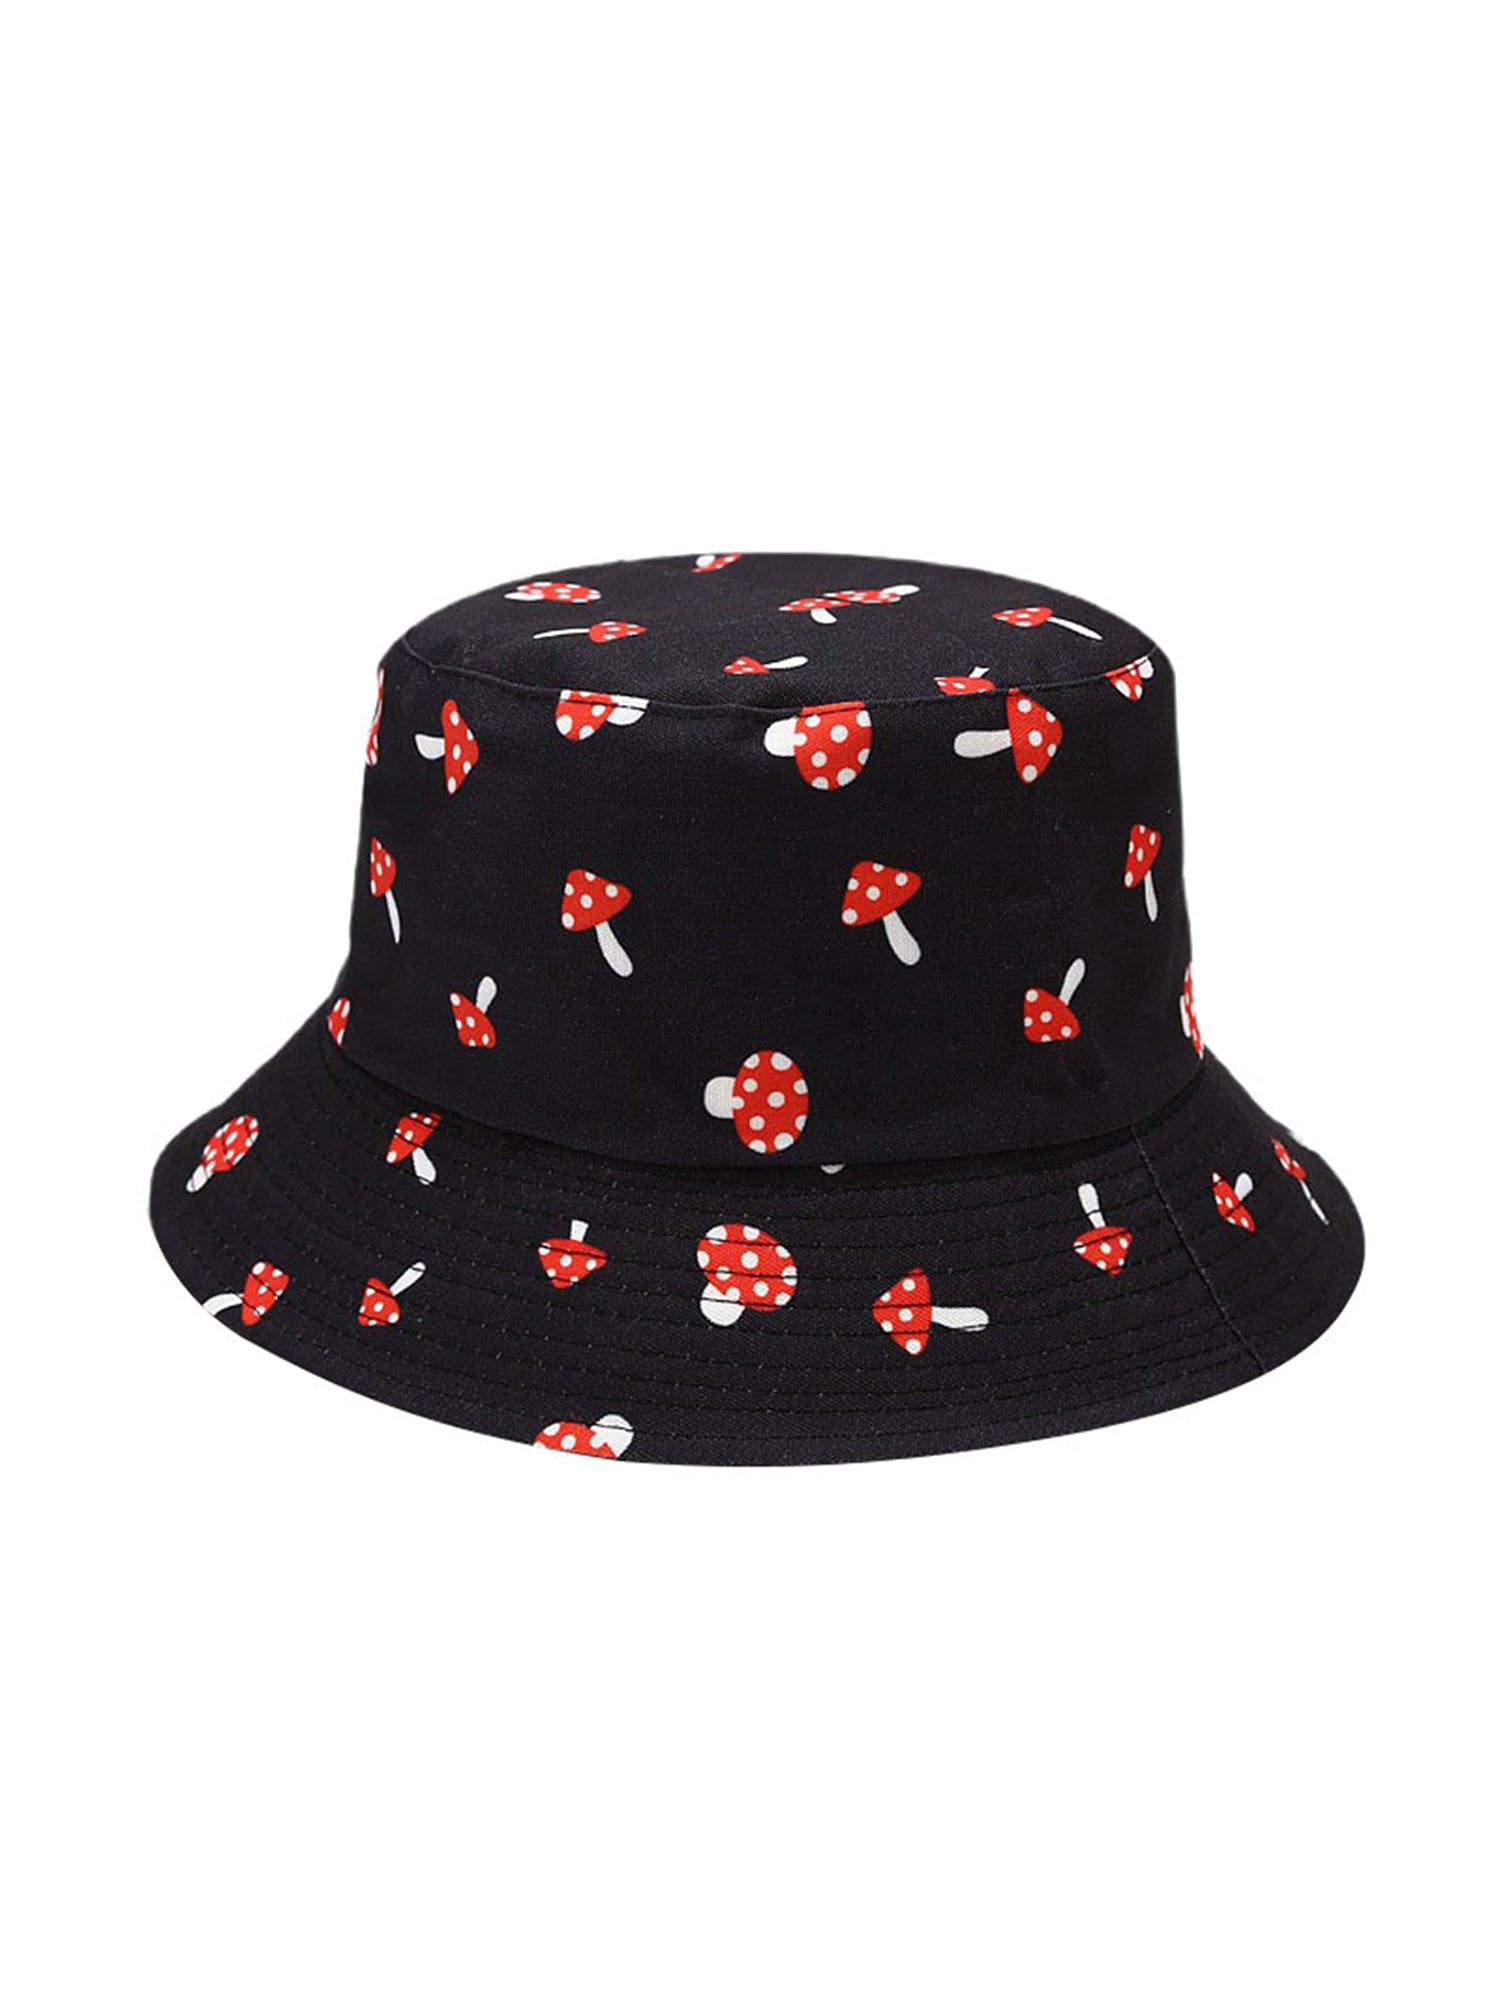 Delicate Cherry Blossom New Summer Unisex Cotton Fashion Fishing Sun Bucket Hats for Kid Teens Women and Men with Customize Top Packable Fisherman Cap for Outdoor Travel